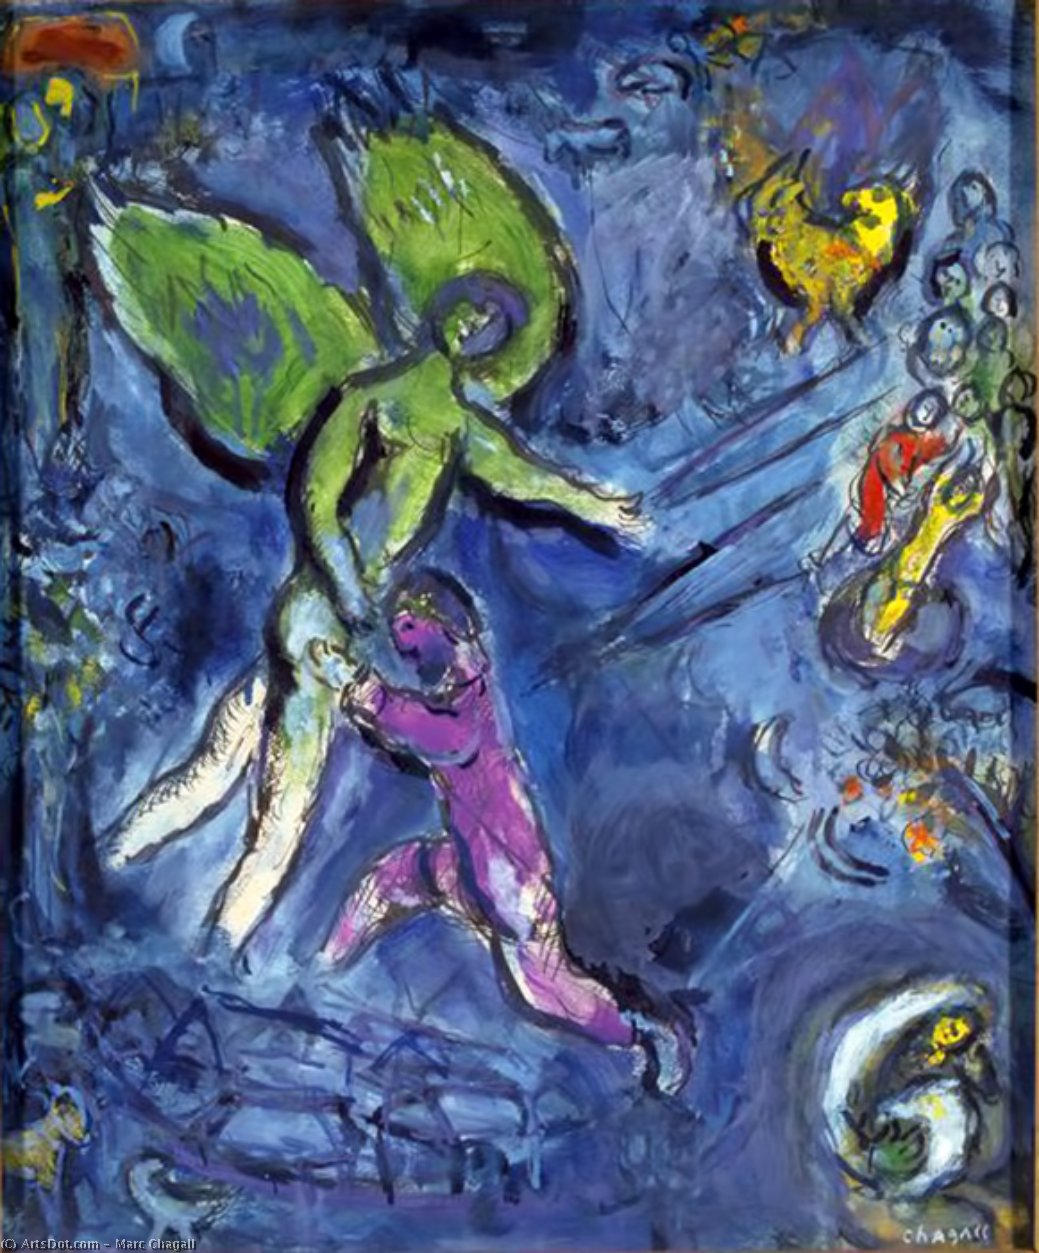 Wikioo.org - สารานุกรมวิจิตรศิลป์ - จิตรกรรม Marc Chagall - Jacob Wrestling with the Angel